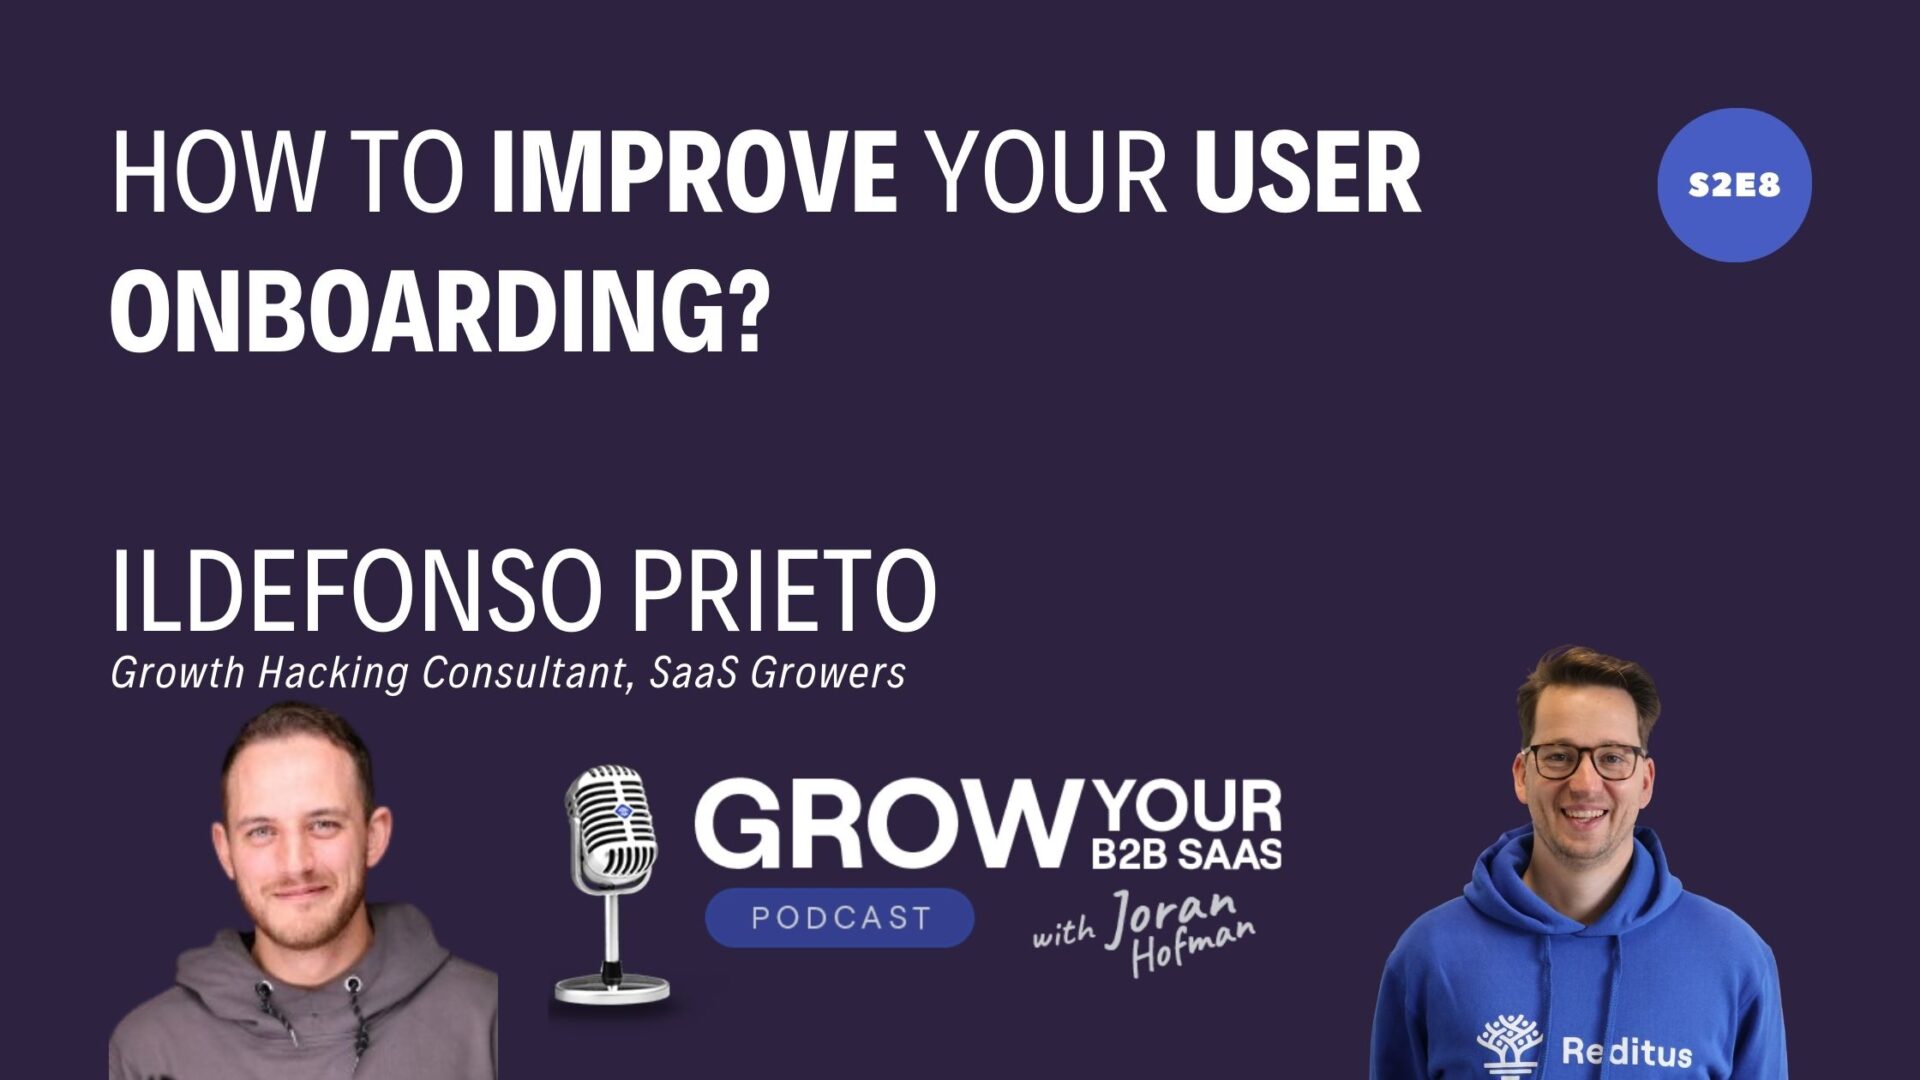 S2E8 – How to improve your user onboarding? with Ildefonso Prieto